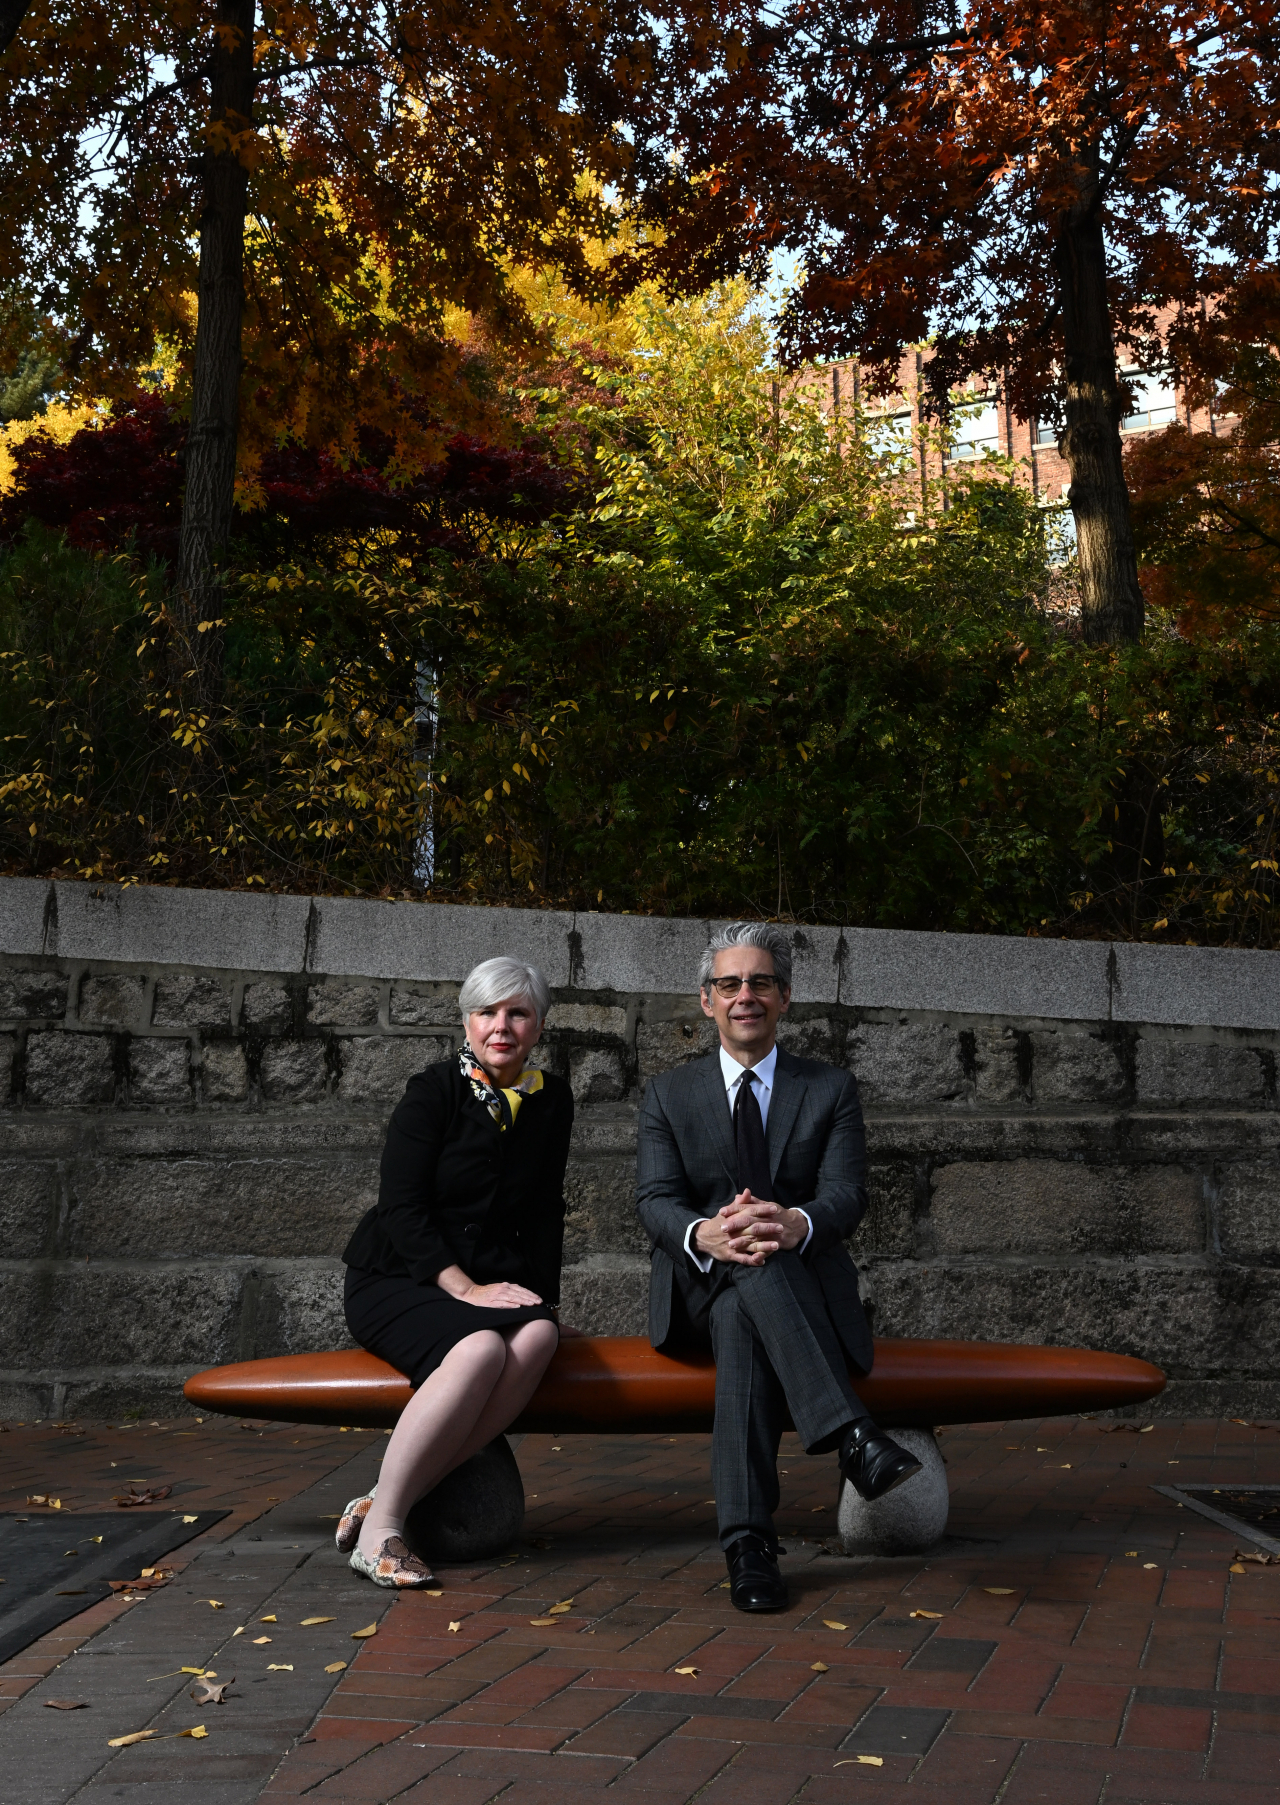 Chase F. Robinson, director of Smithsonian’s National Museum of Asian Art, (right) and Lori Duggan Gold, deputy director for operations and external affairs at Smithsonian’s National Museum of Asian Art, pose for a photo outside the Deoksugung palace in central Seoul, Friday. (Im Se-jun/The Korea Herald)